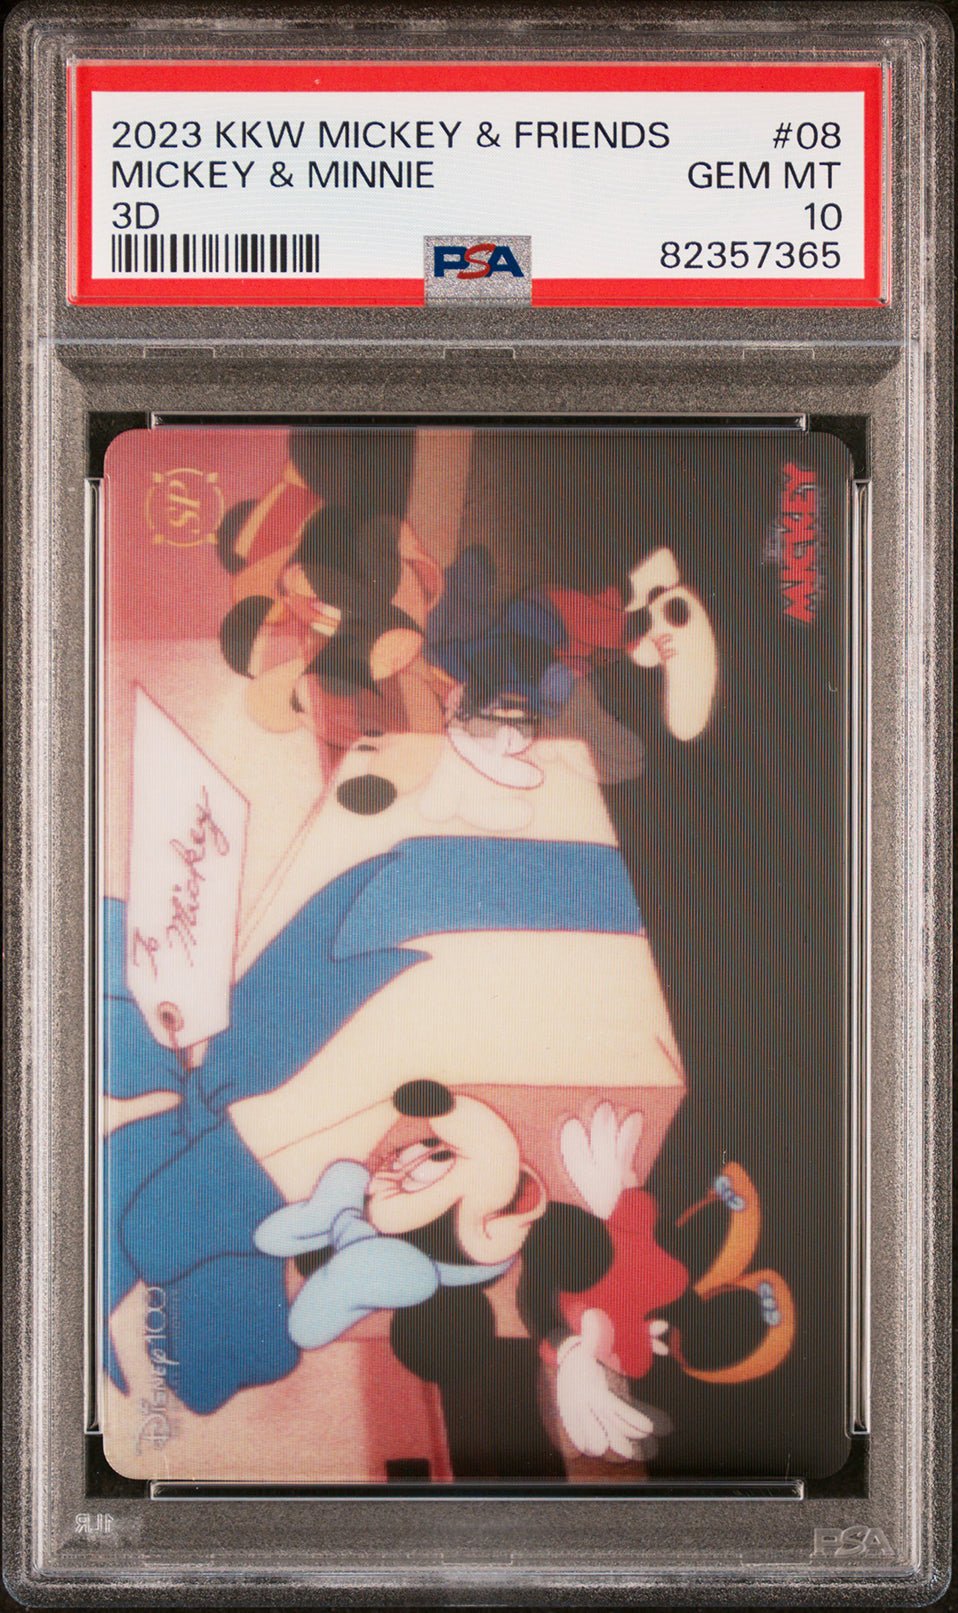 MICKEY & MINNIE MOUSE PSA 10 2023 Kakawow Hotbox Mickey & Friends 3D HDMGS08 Disney Graded Cards Insert - Hobby Gems